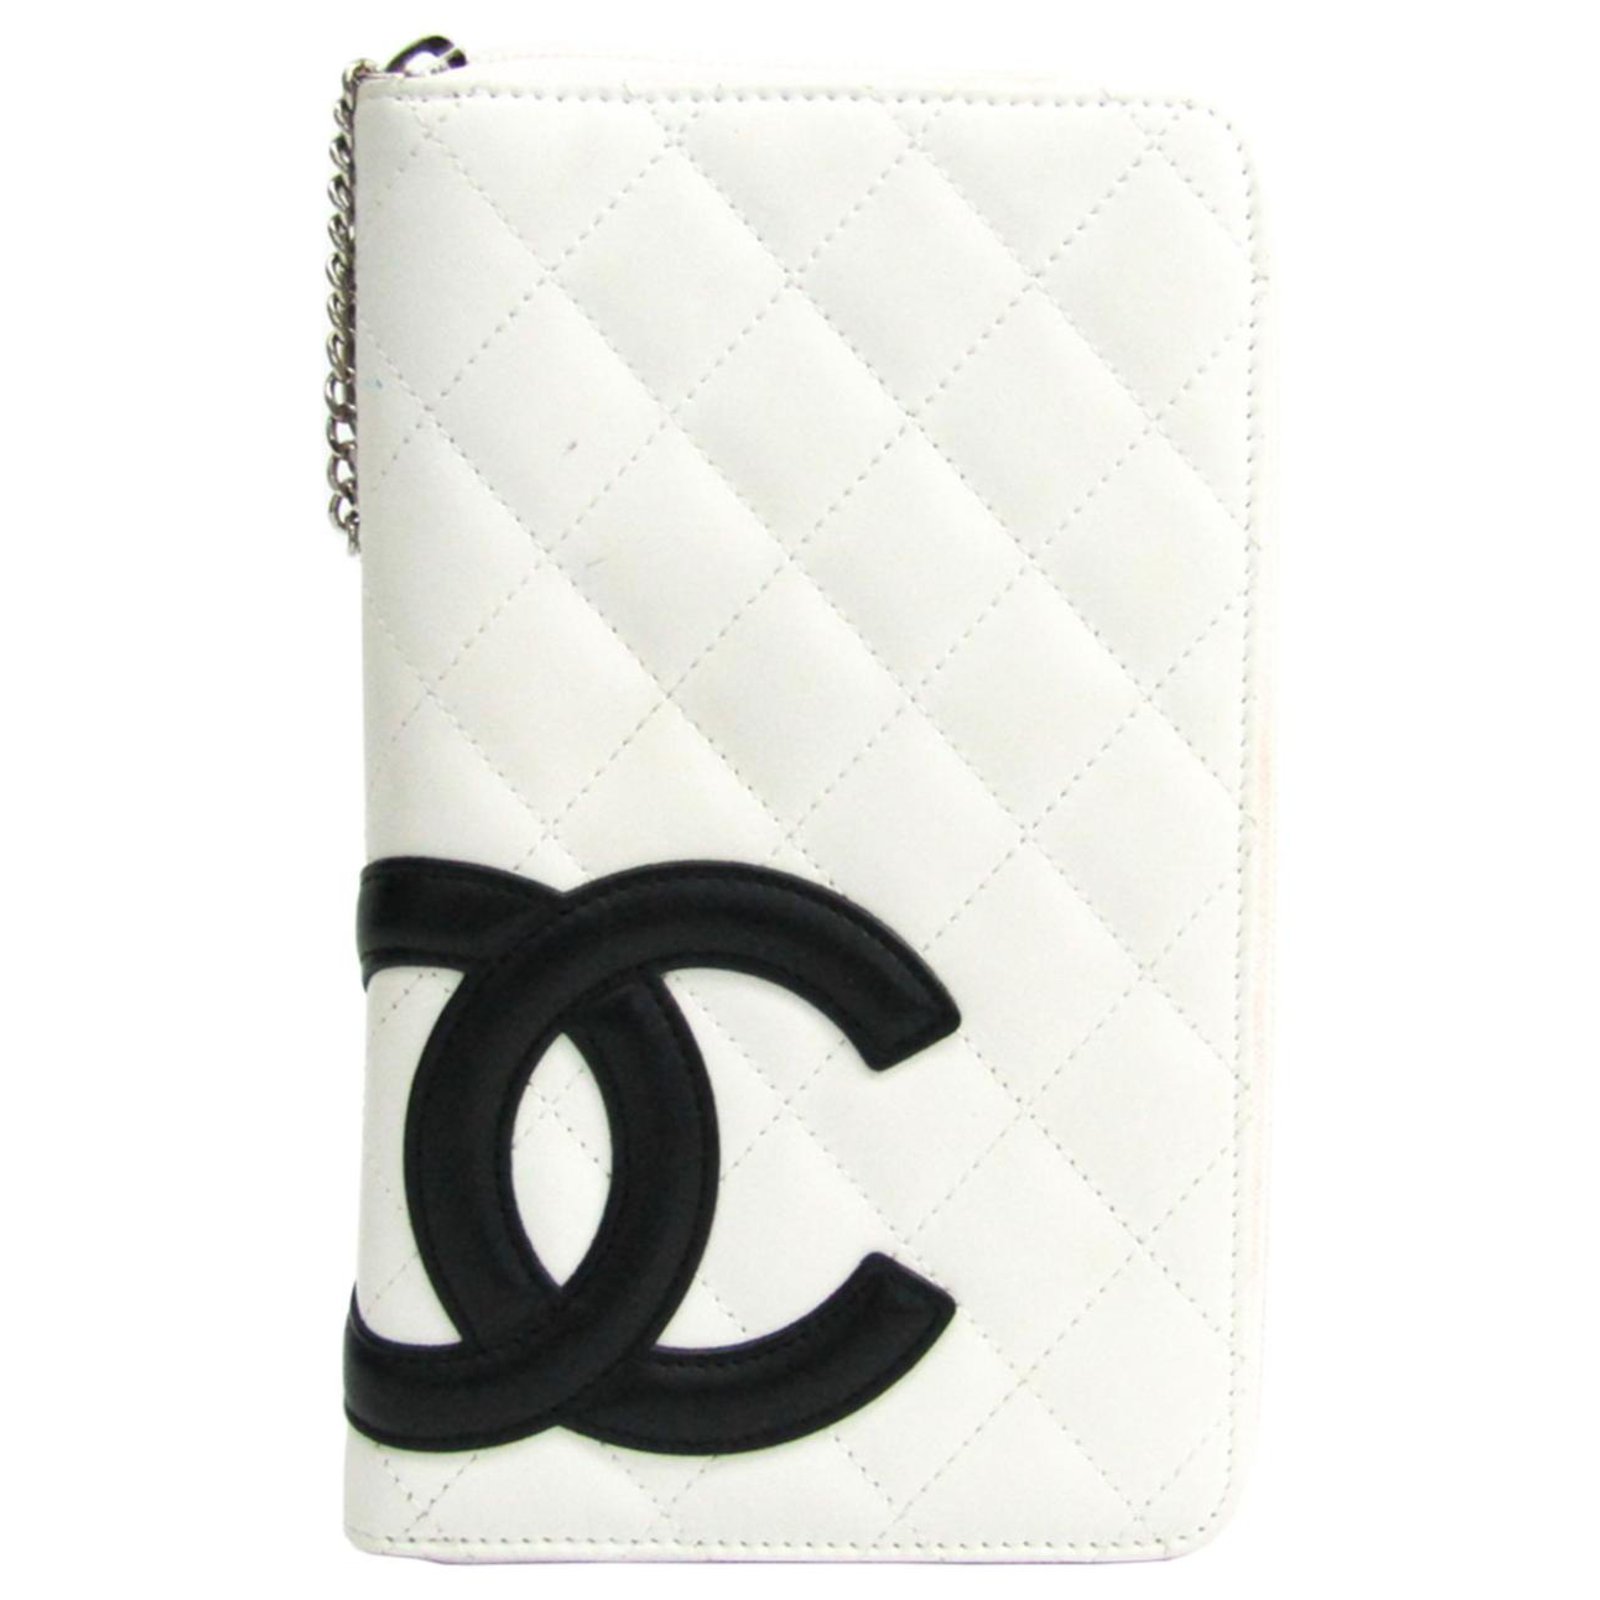 Chanel White Cambon Ligne Long Wallet Black Leather Pony-style